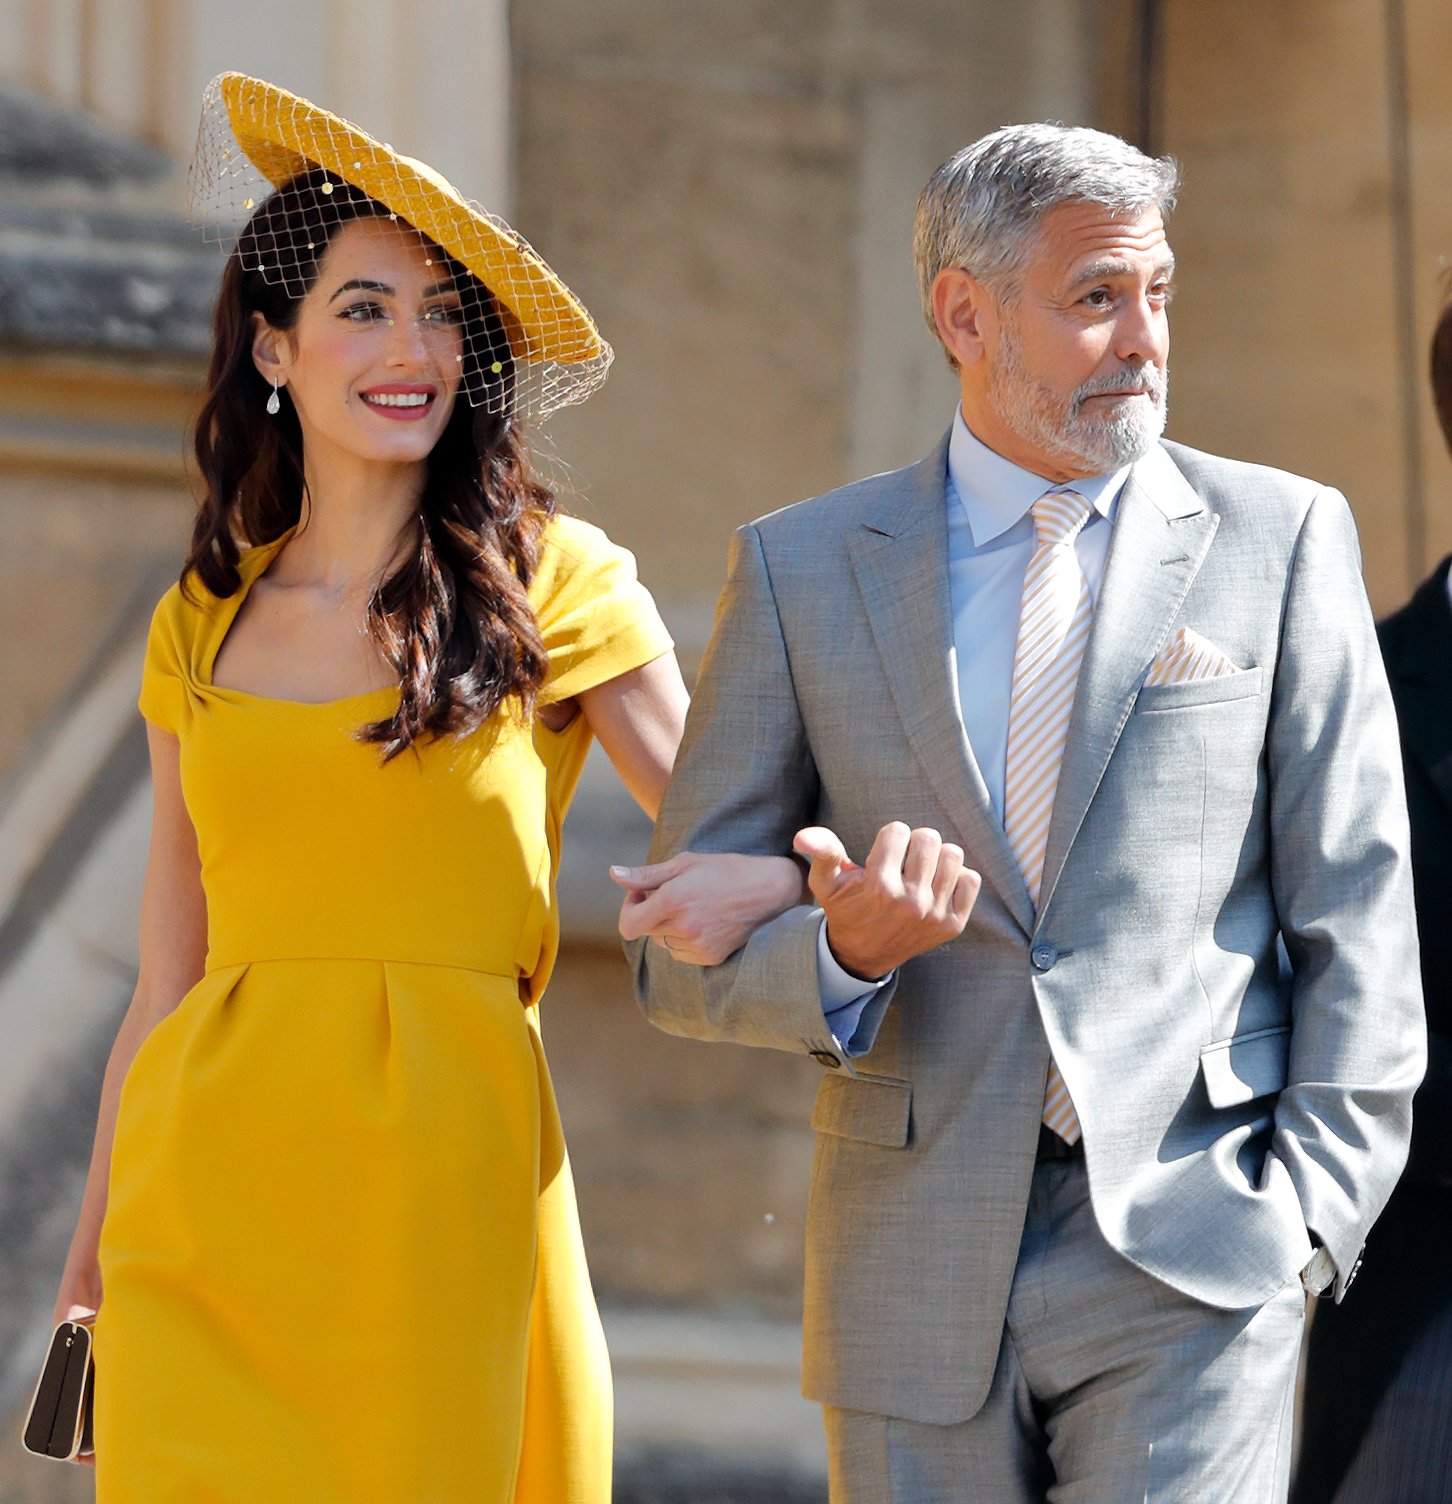 Amal and George Clooney at Prince Harry and Meghan Markle's wedding on May 19, 2018, in Windsor, England. | Source: Getty Images